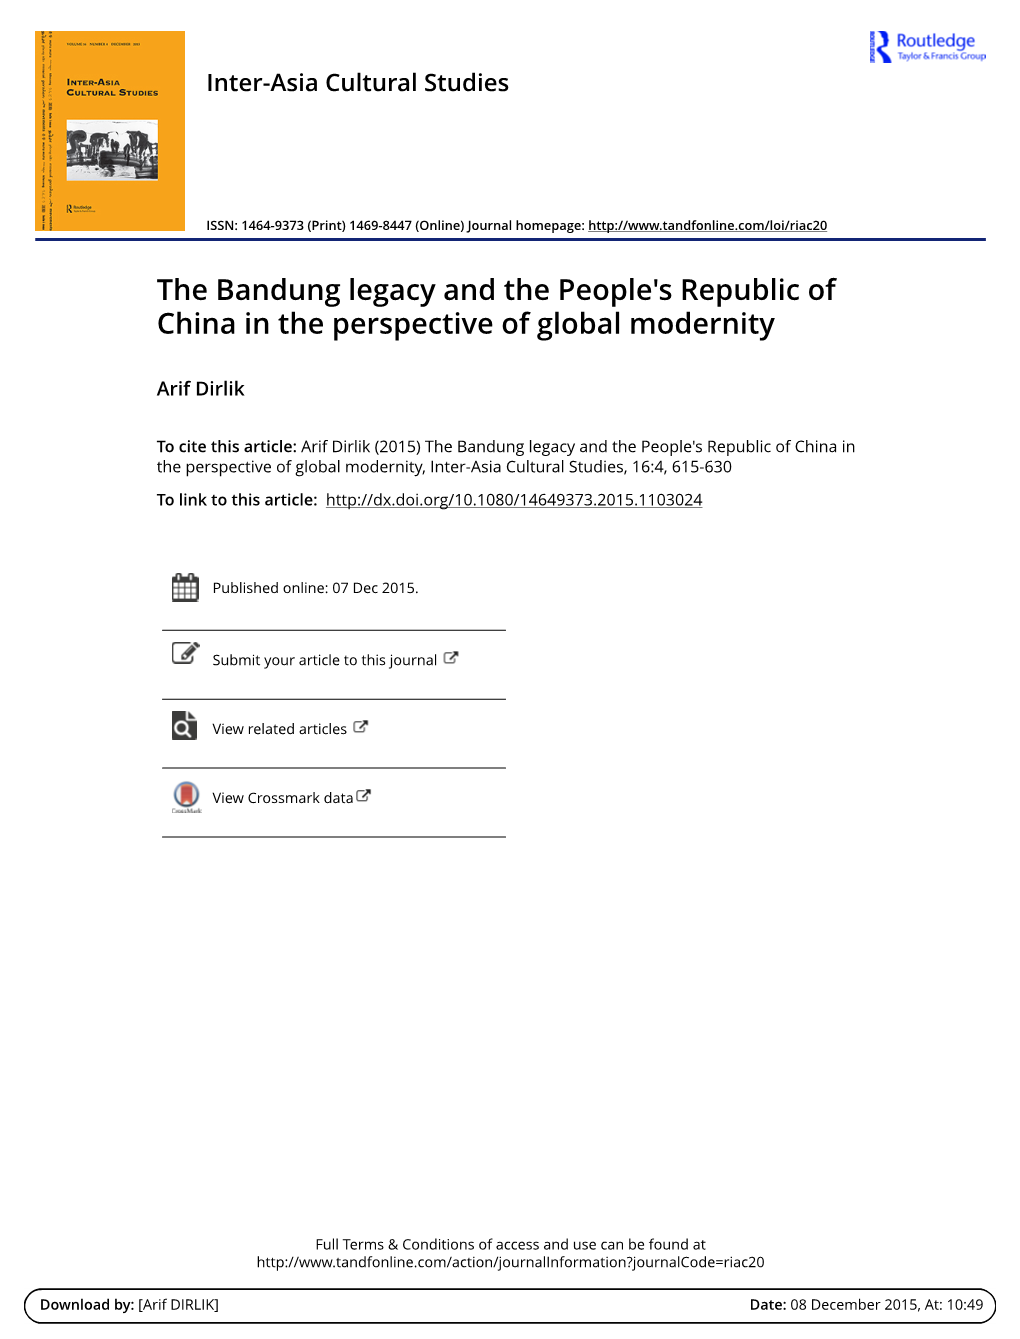 The Bandung Legacy and the People's Republic of China in the Perspective of Global Modernity